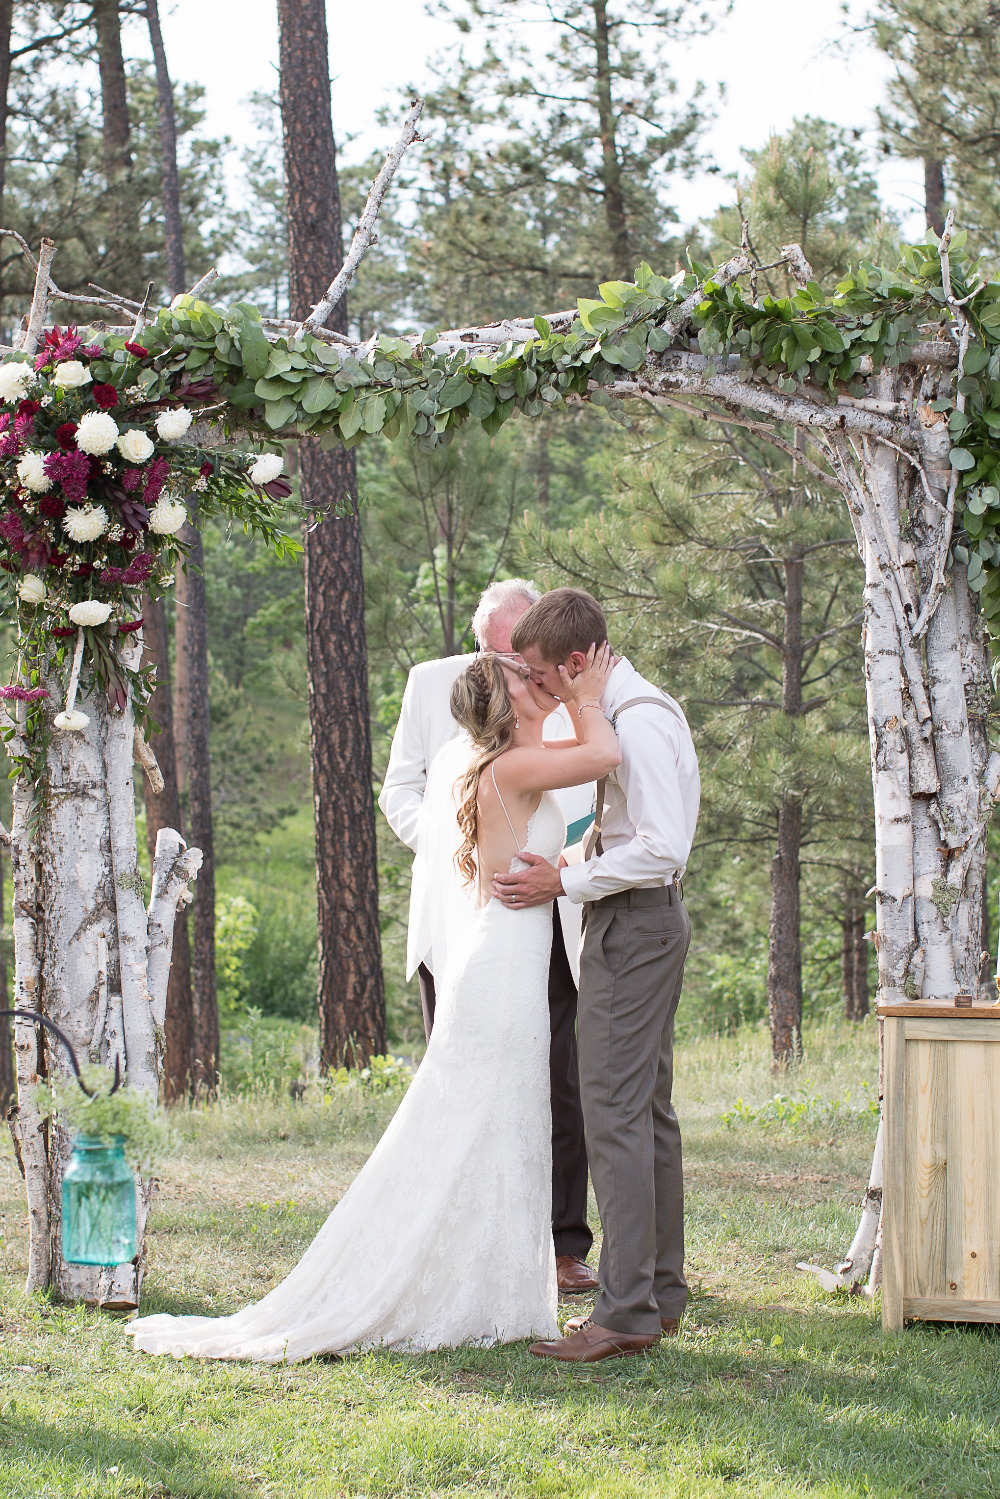 wedding kiss with wooden wedding arch